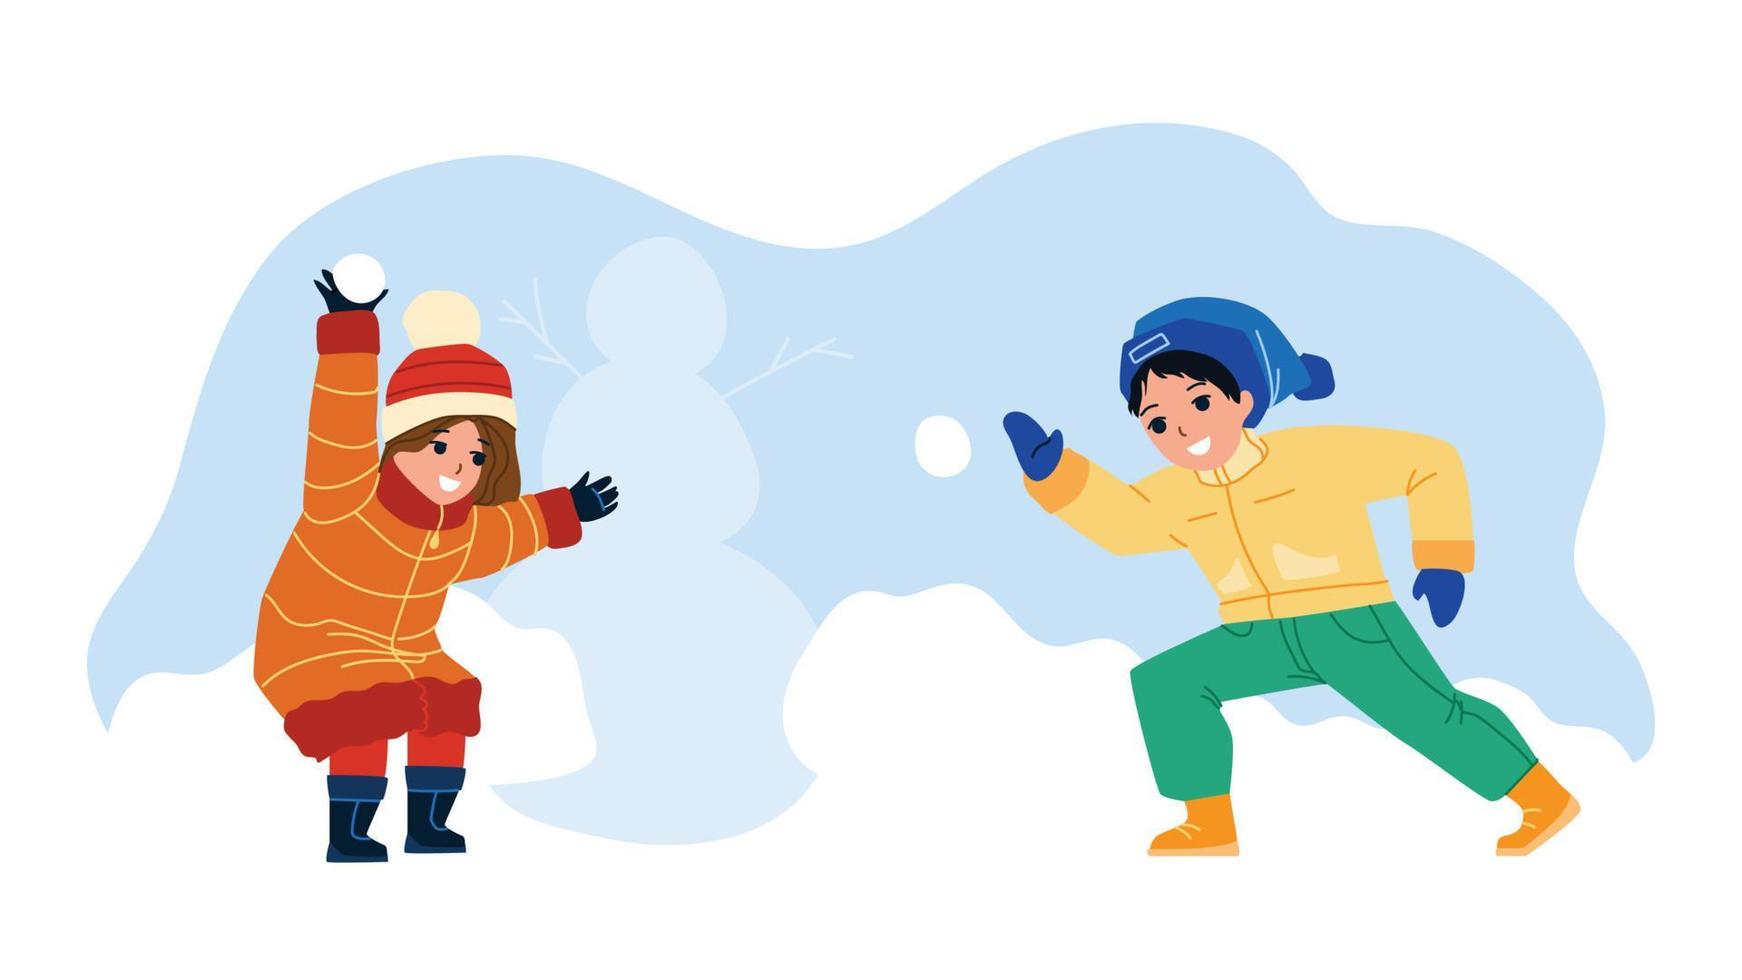 Kids Play With Winter Snow Balls Together Vector